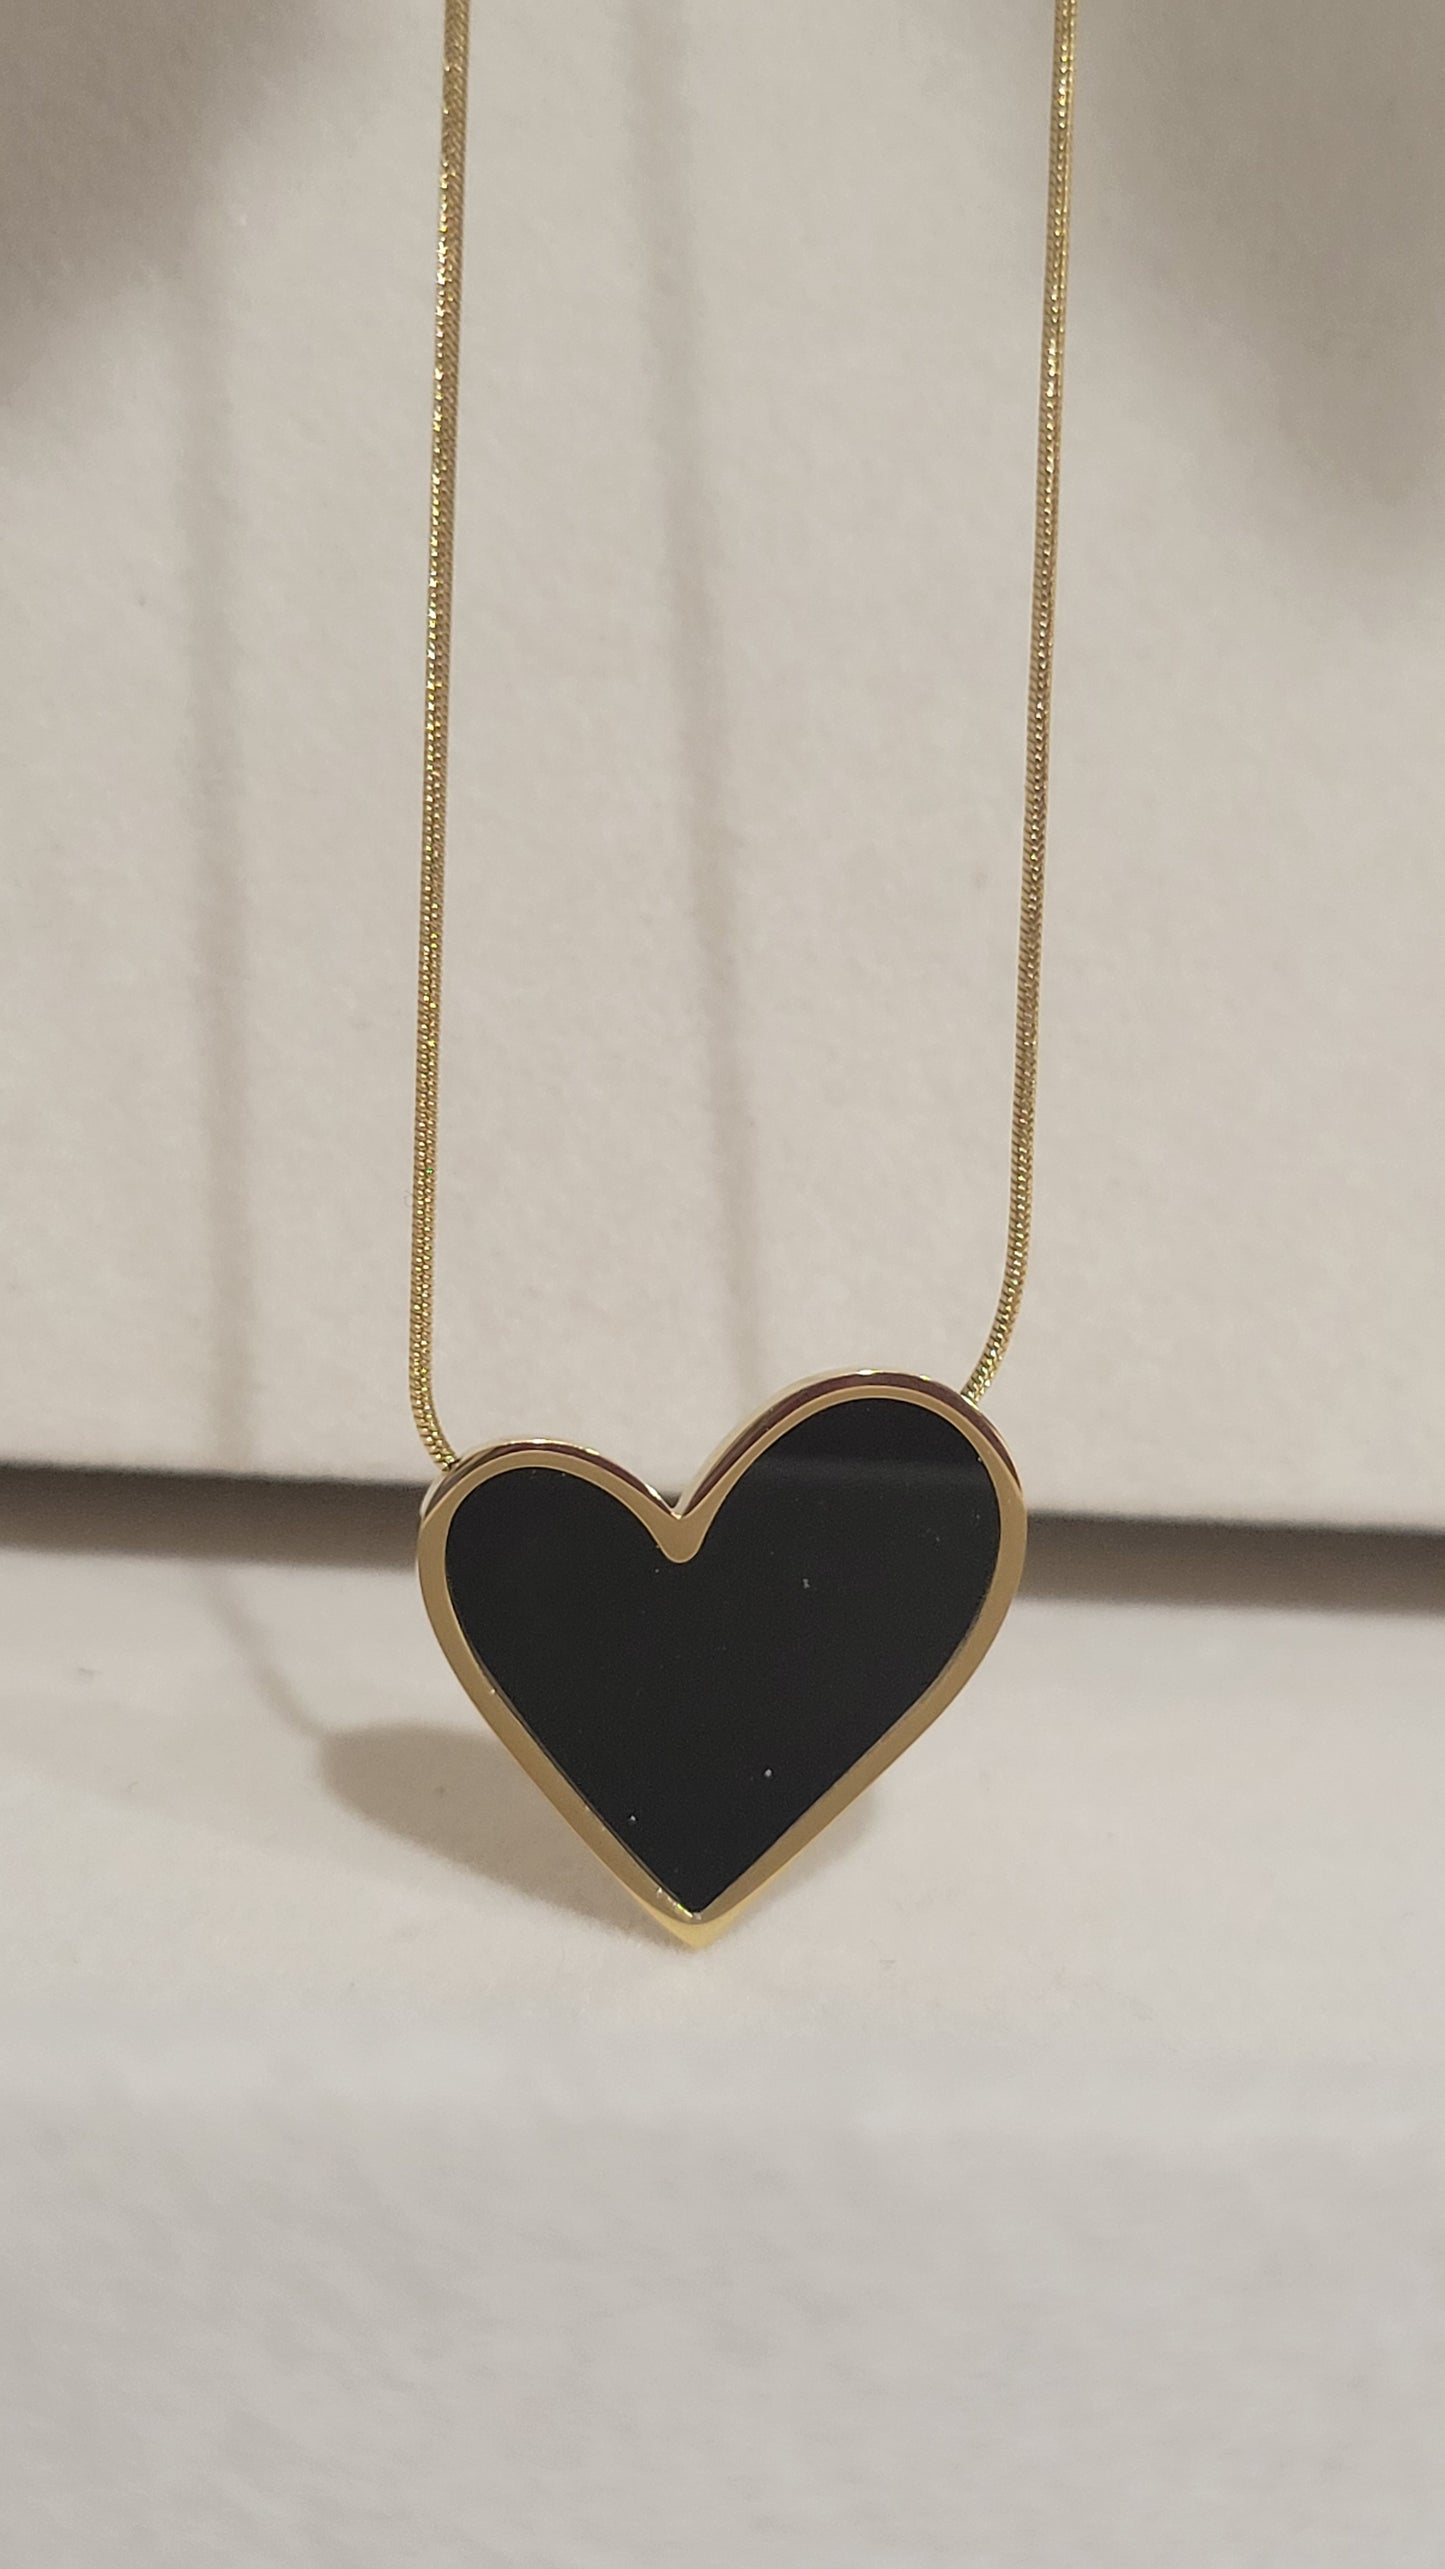 DANGLED LOVE CHARM NECKLACE